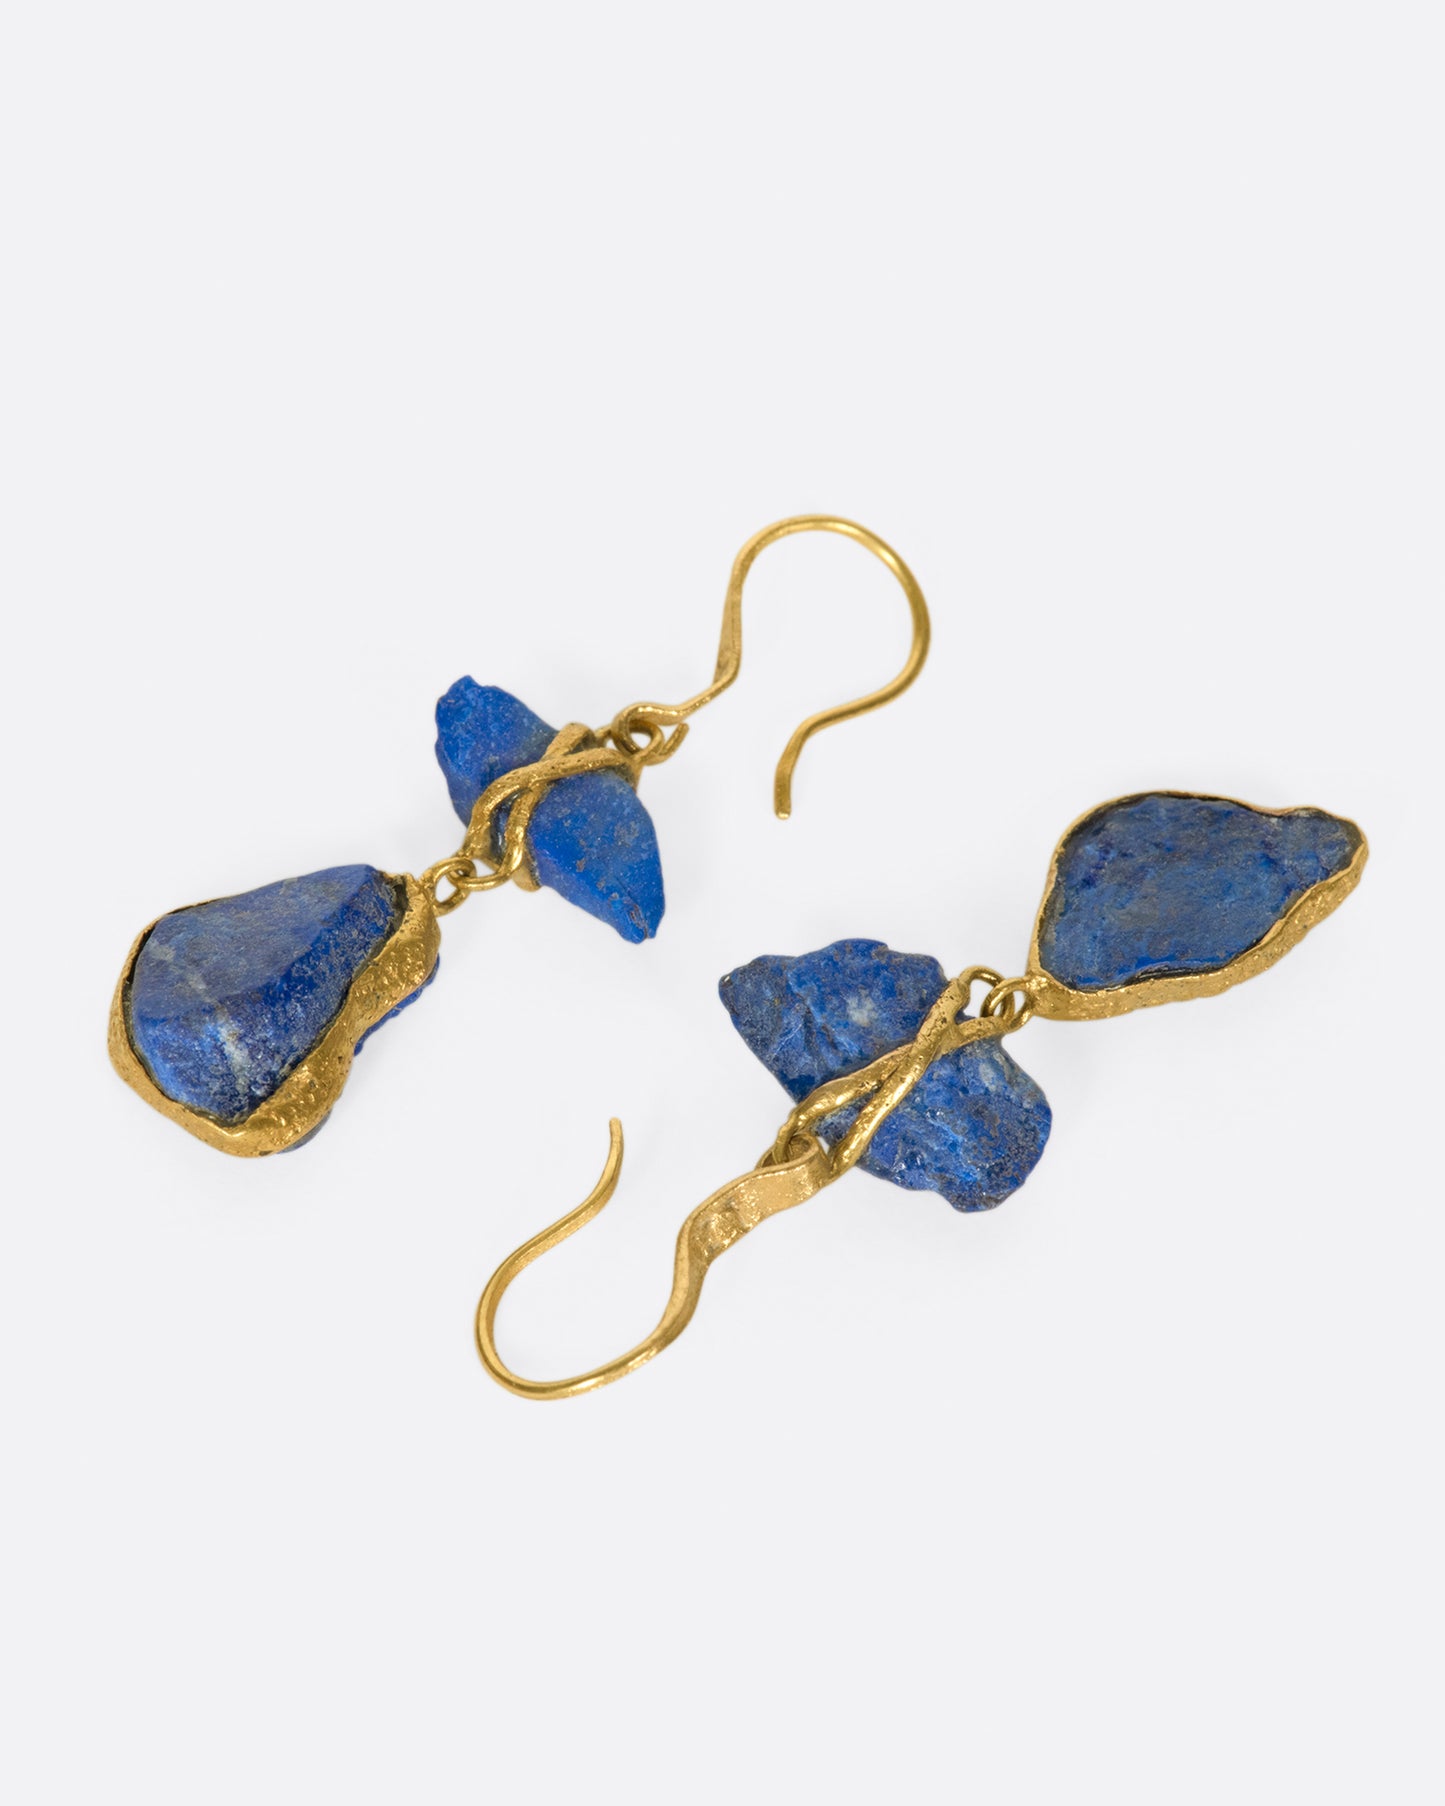 Vibrant, raw, Afghan lapis pebbles wrapped in high karat gold.